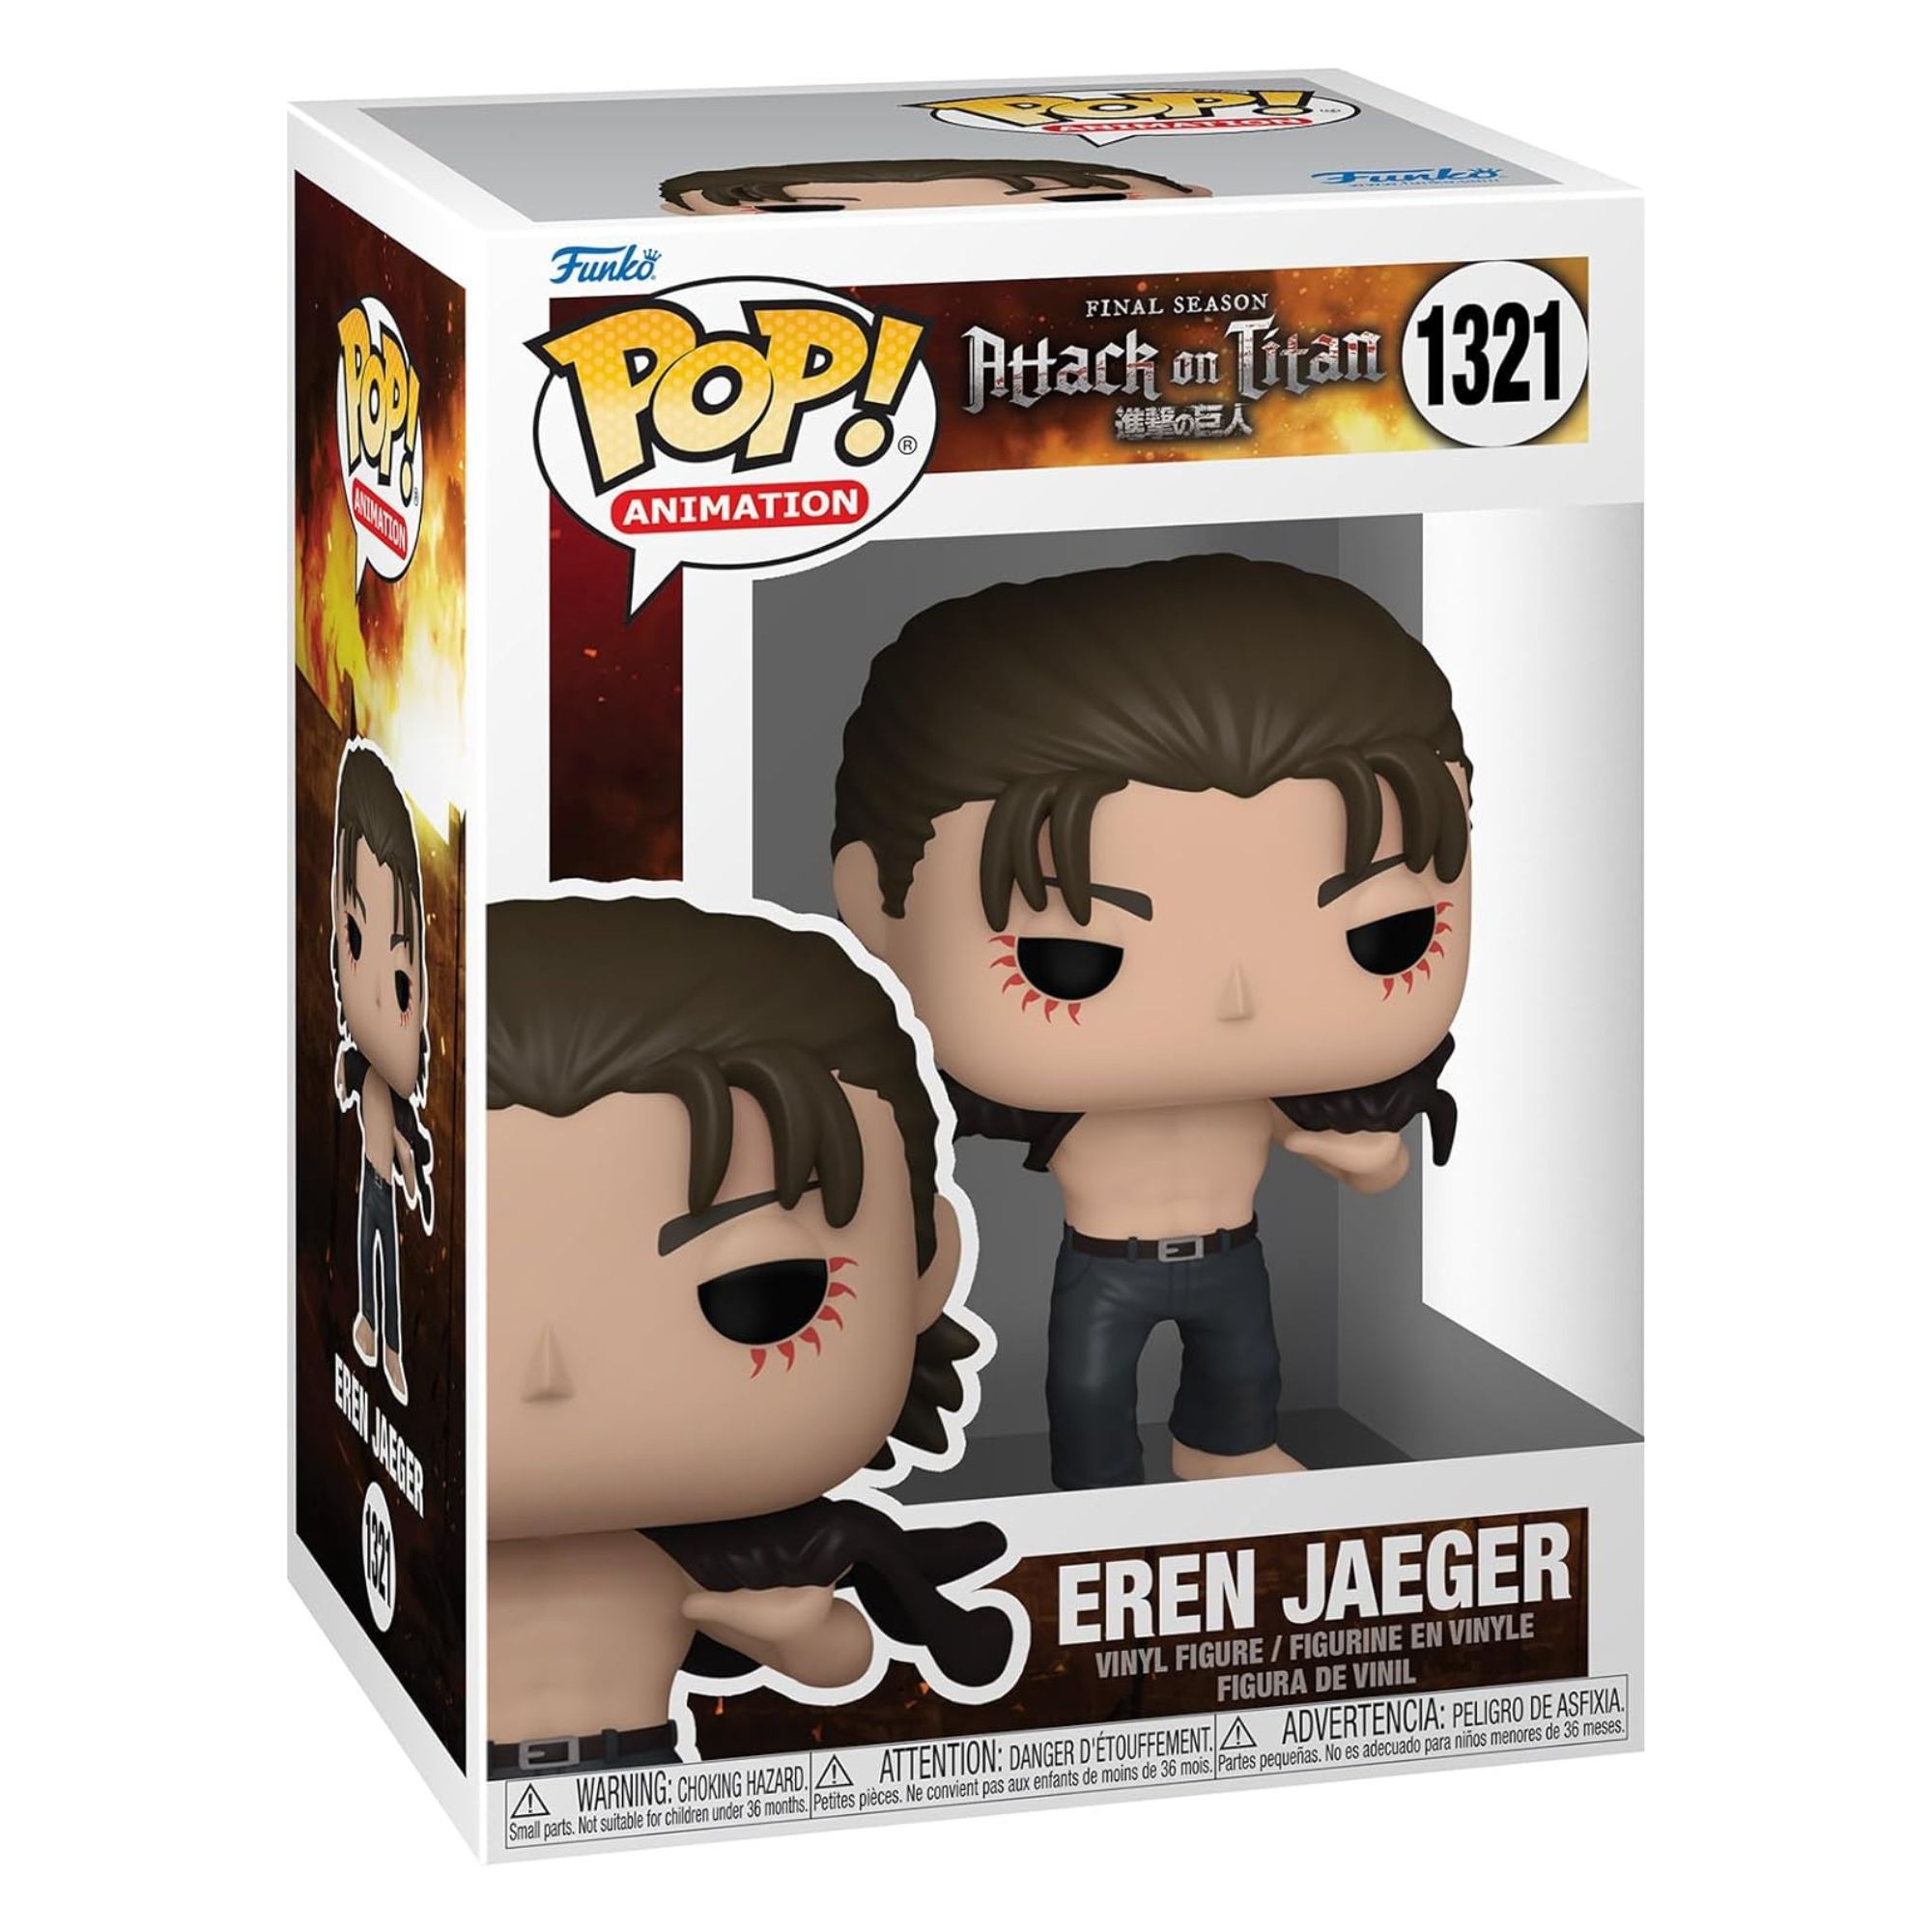 Product still of the Attack On Titan Eren Jaeger Funko Pop! #1321 on a white background